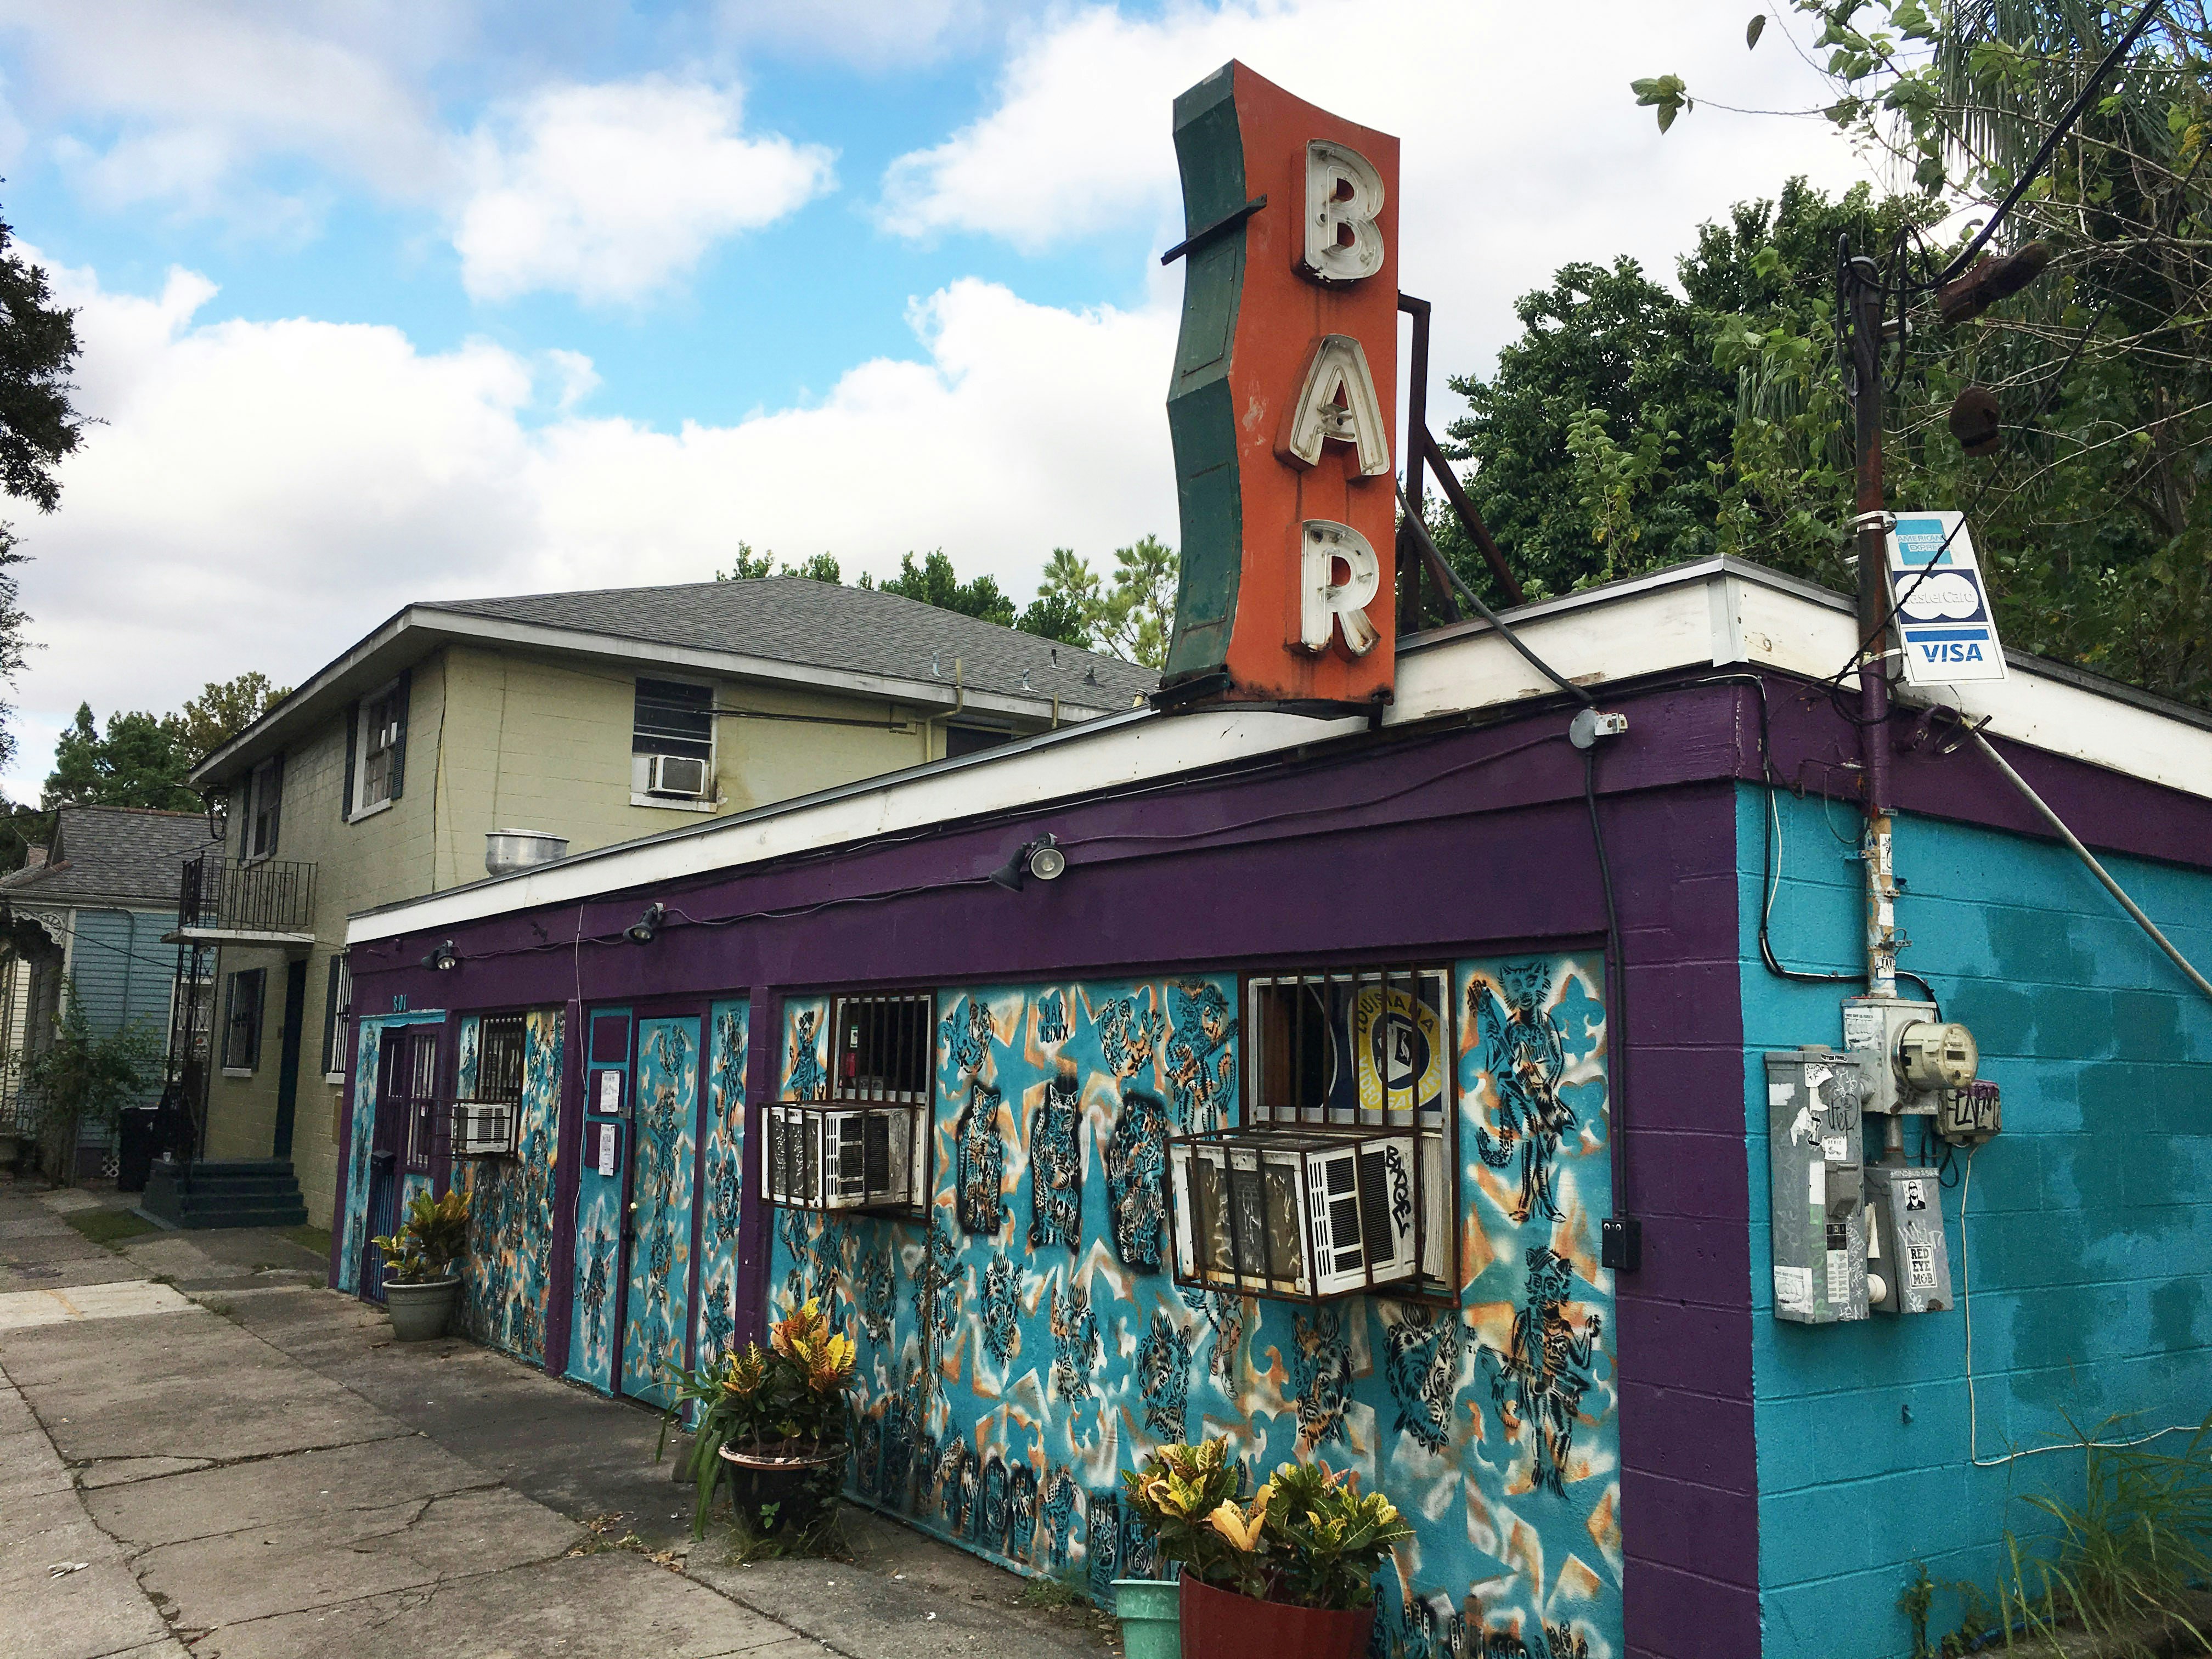 Exterior shot of Bar Redux with its bright blue bricks and purple boarder. There are small black figures painted on the front part of the building and a large "Bar" neon sign on the roof. 